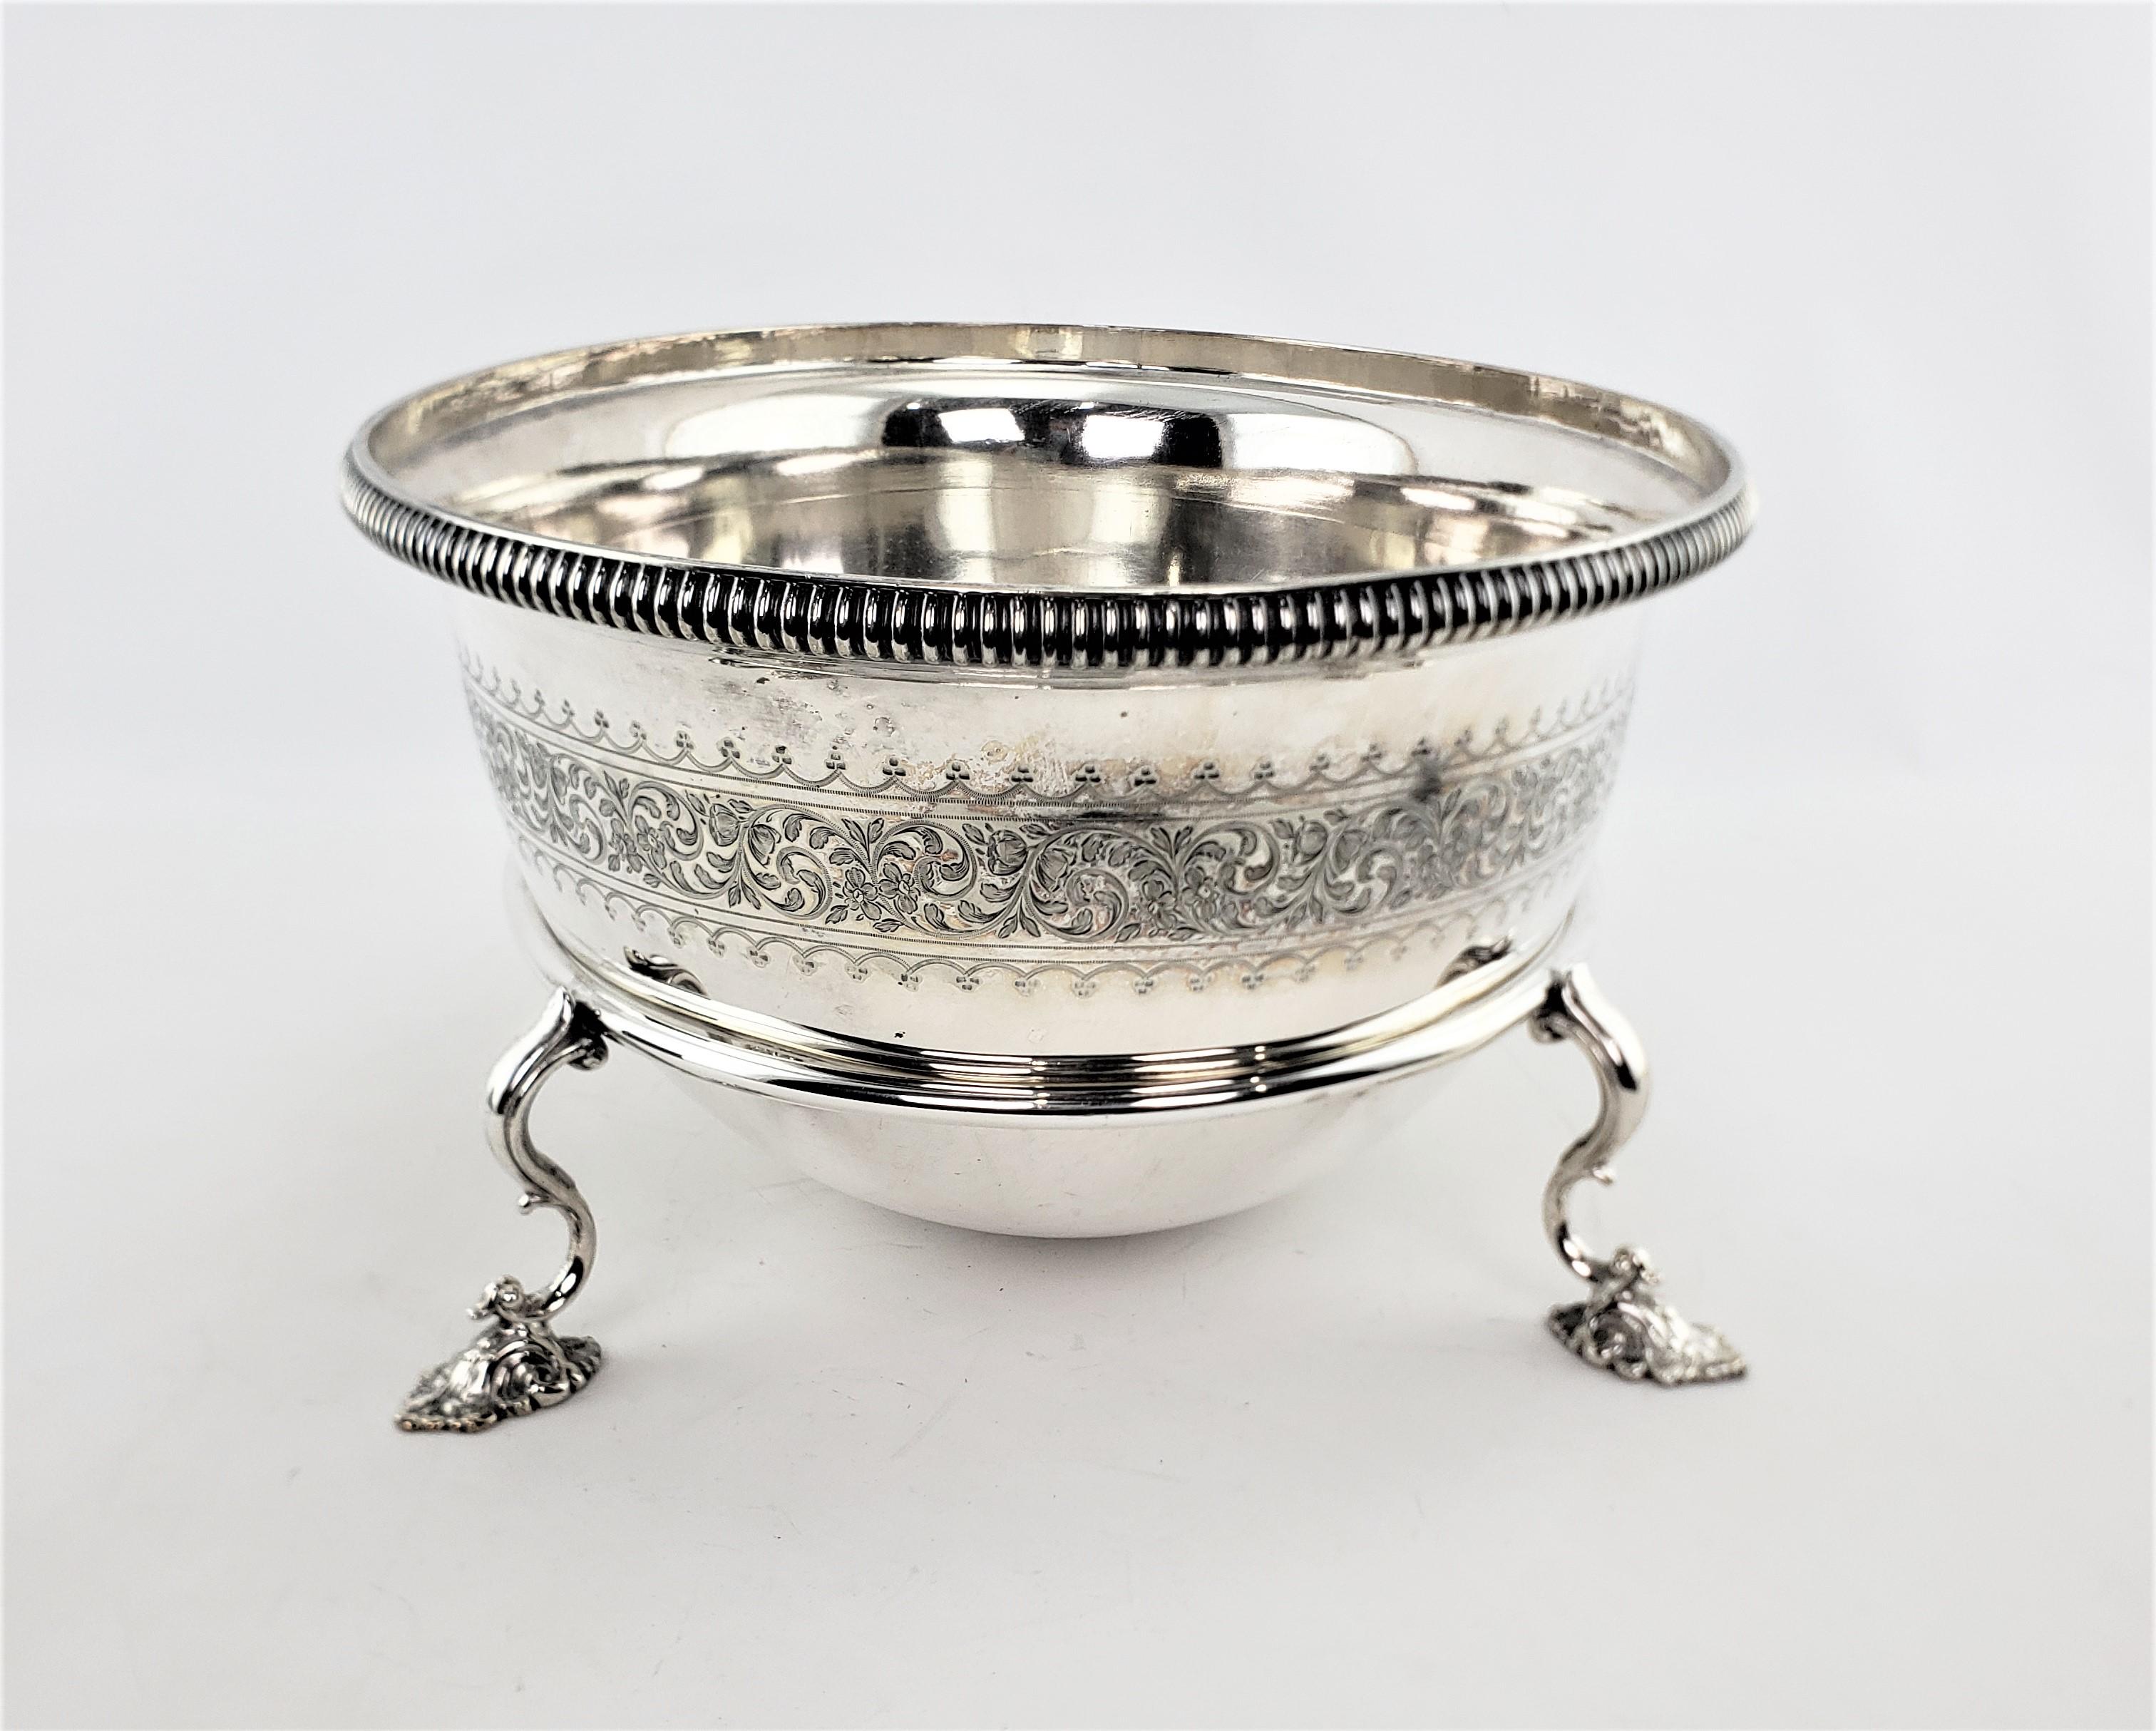 English Antique Silver Plated Converted Meat Dome Ice Trough, Wine Cooler or Centerpiece For Sale